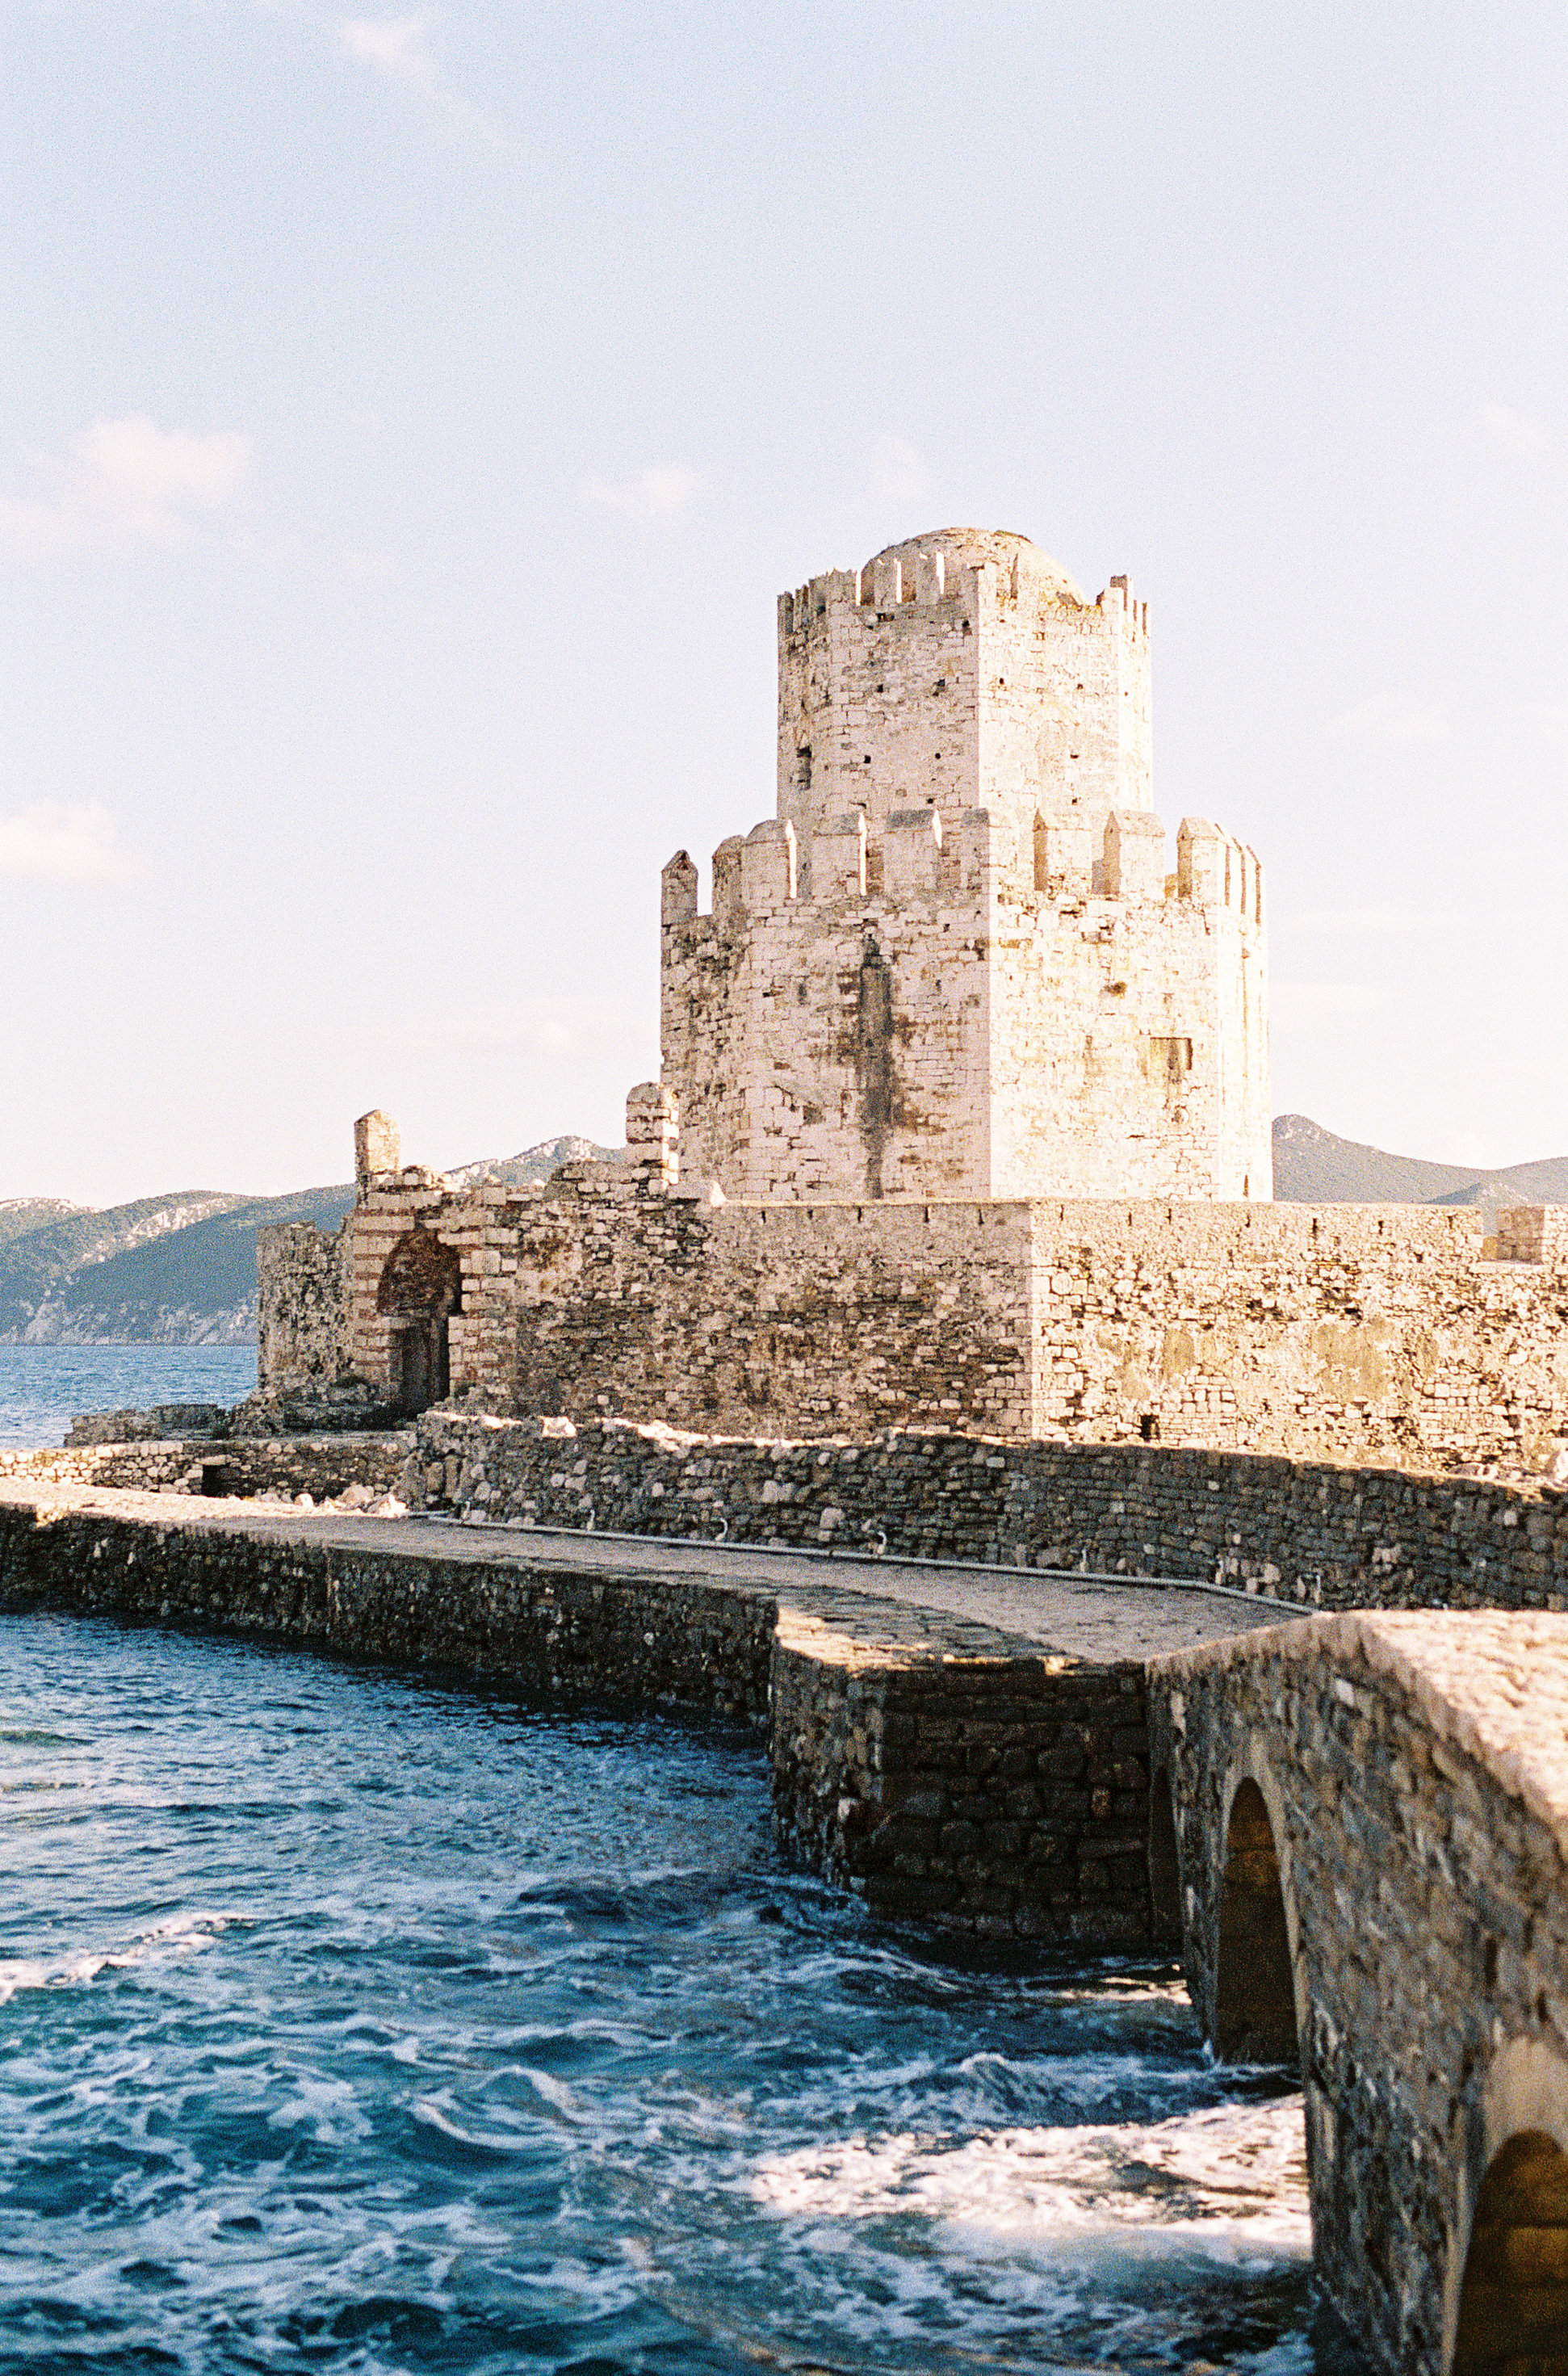 Water by Methoni Castle